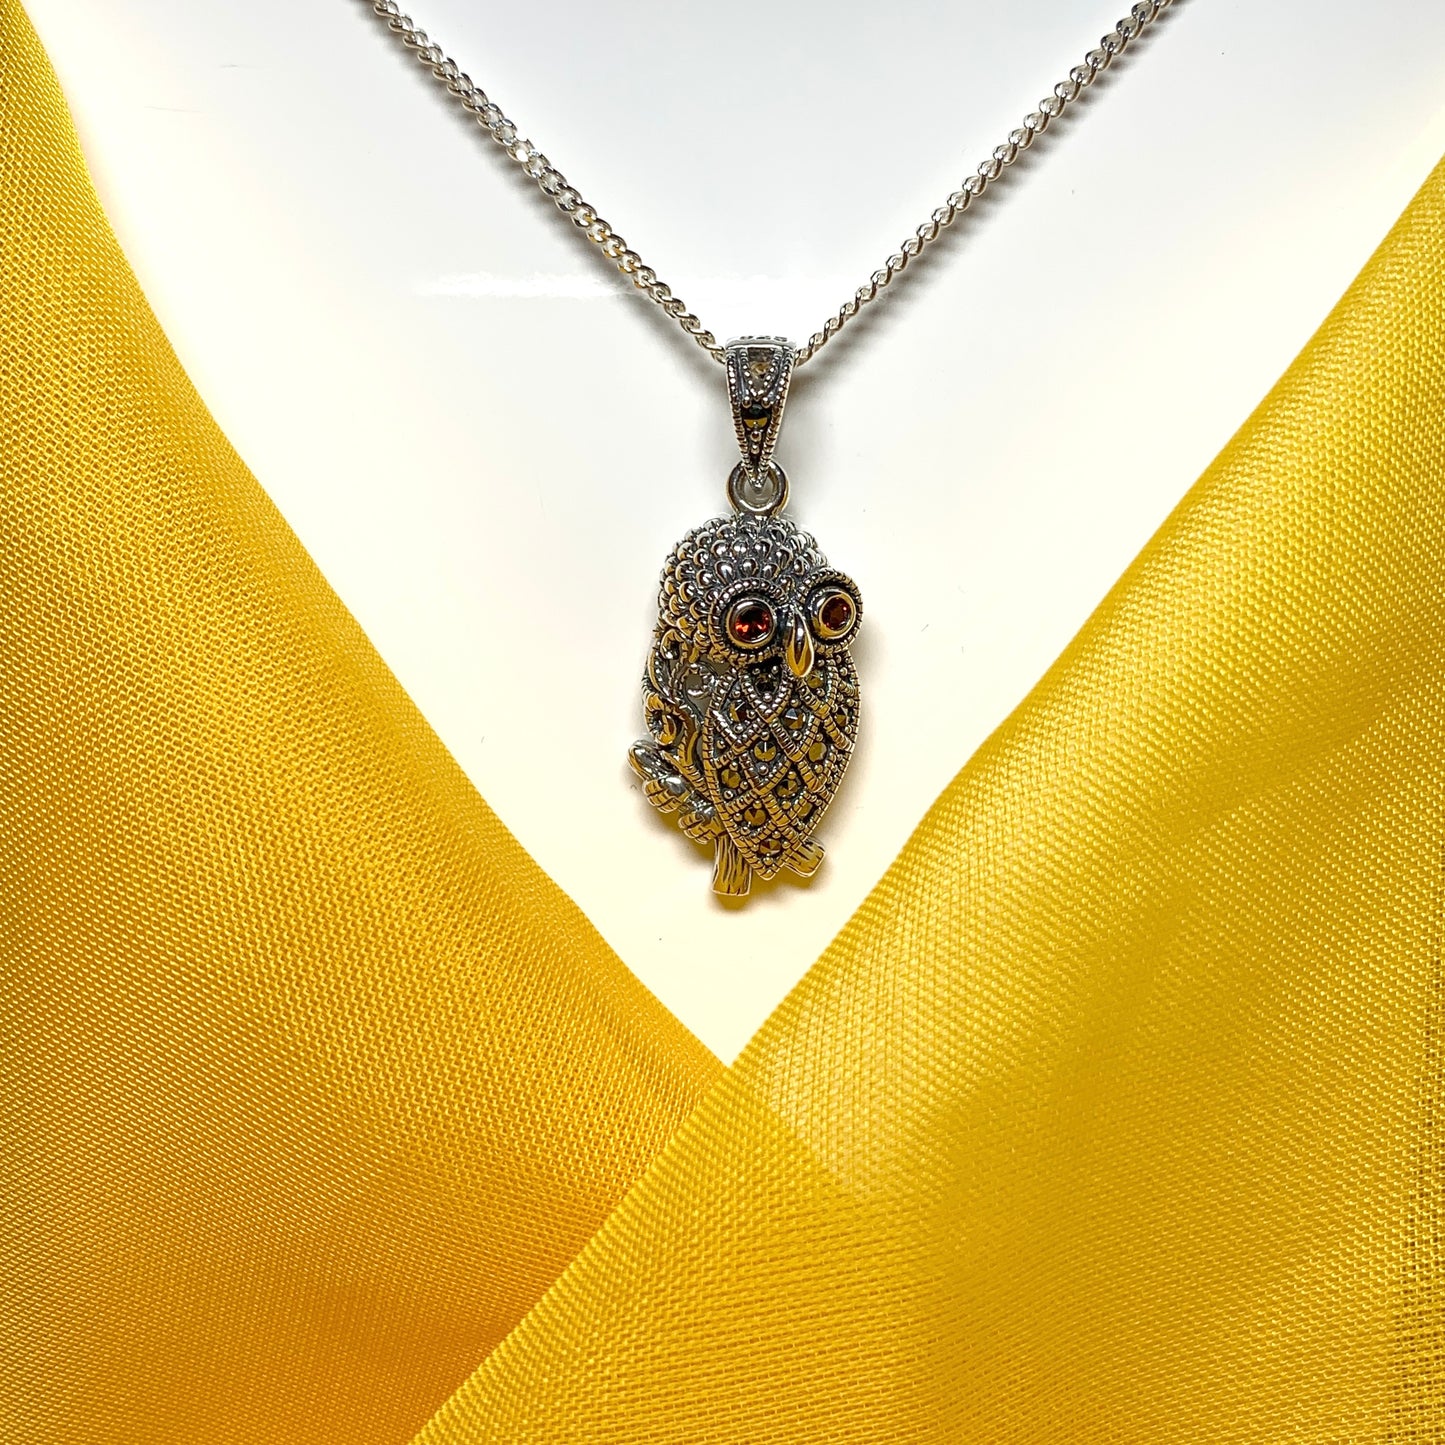 Owl Necklace Marcasite and Garnet Sterling Silver